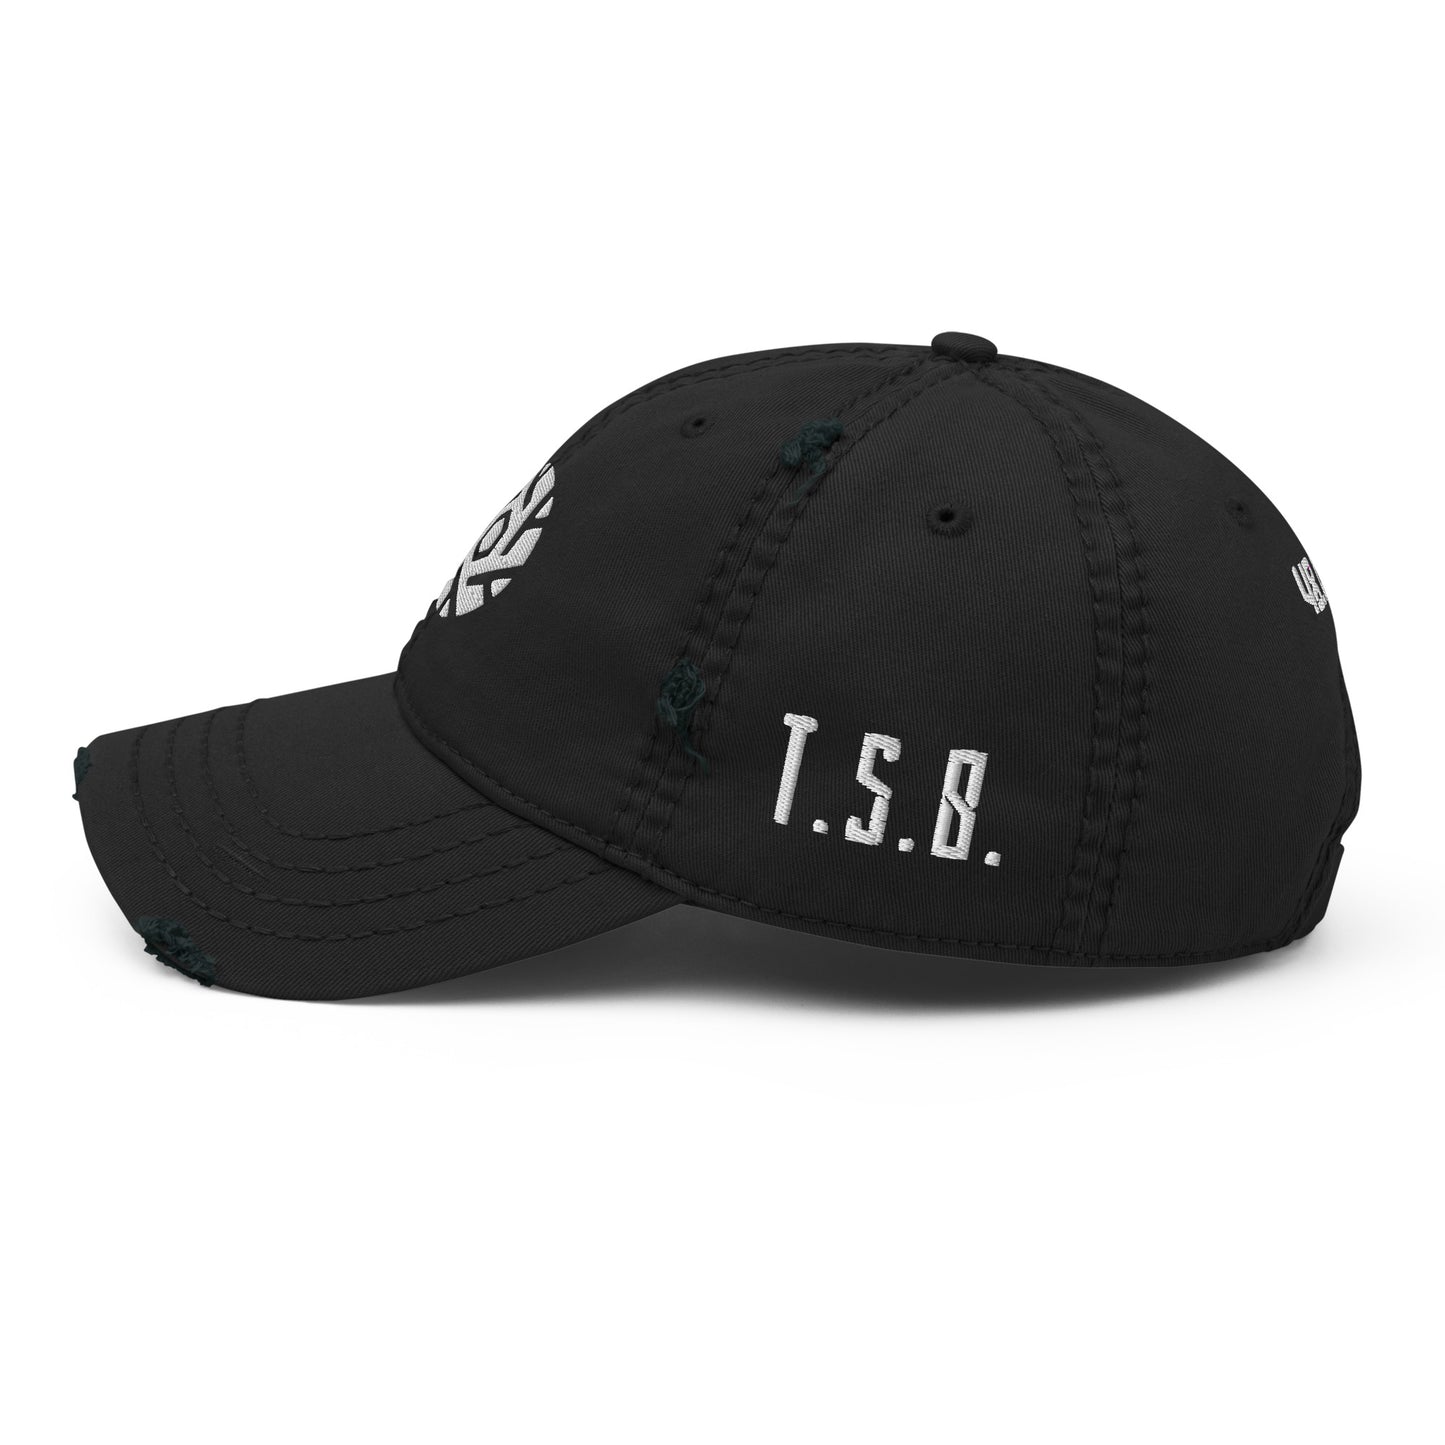 "Legacy of Snow" Cycle Distressed Dad Hat